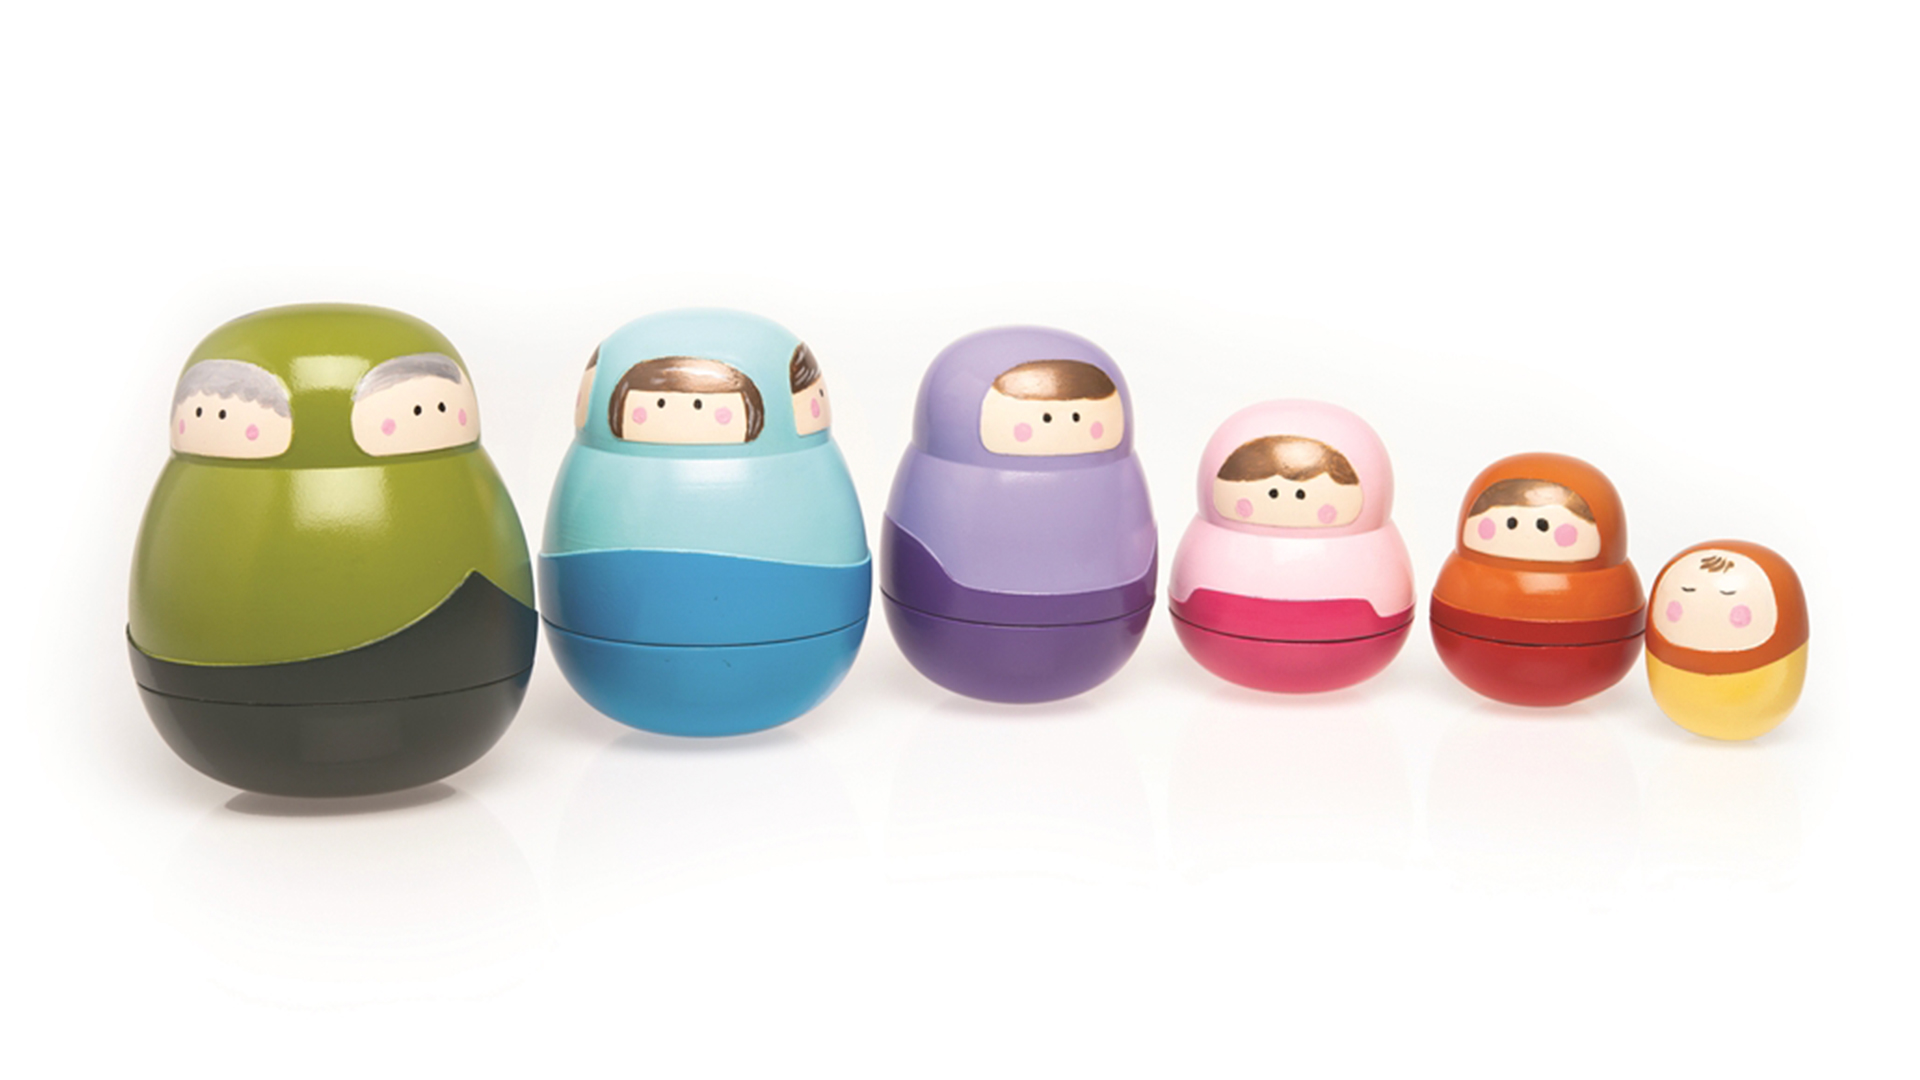 Six nesting dolls of different colors side by side with faces characterizing different life stages and ages